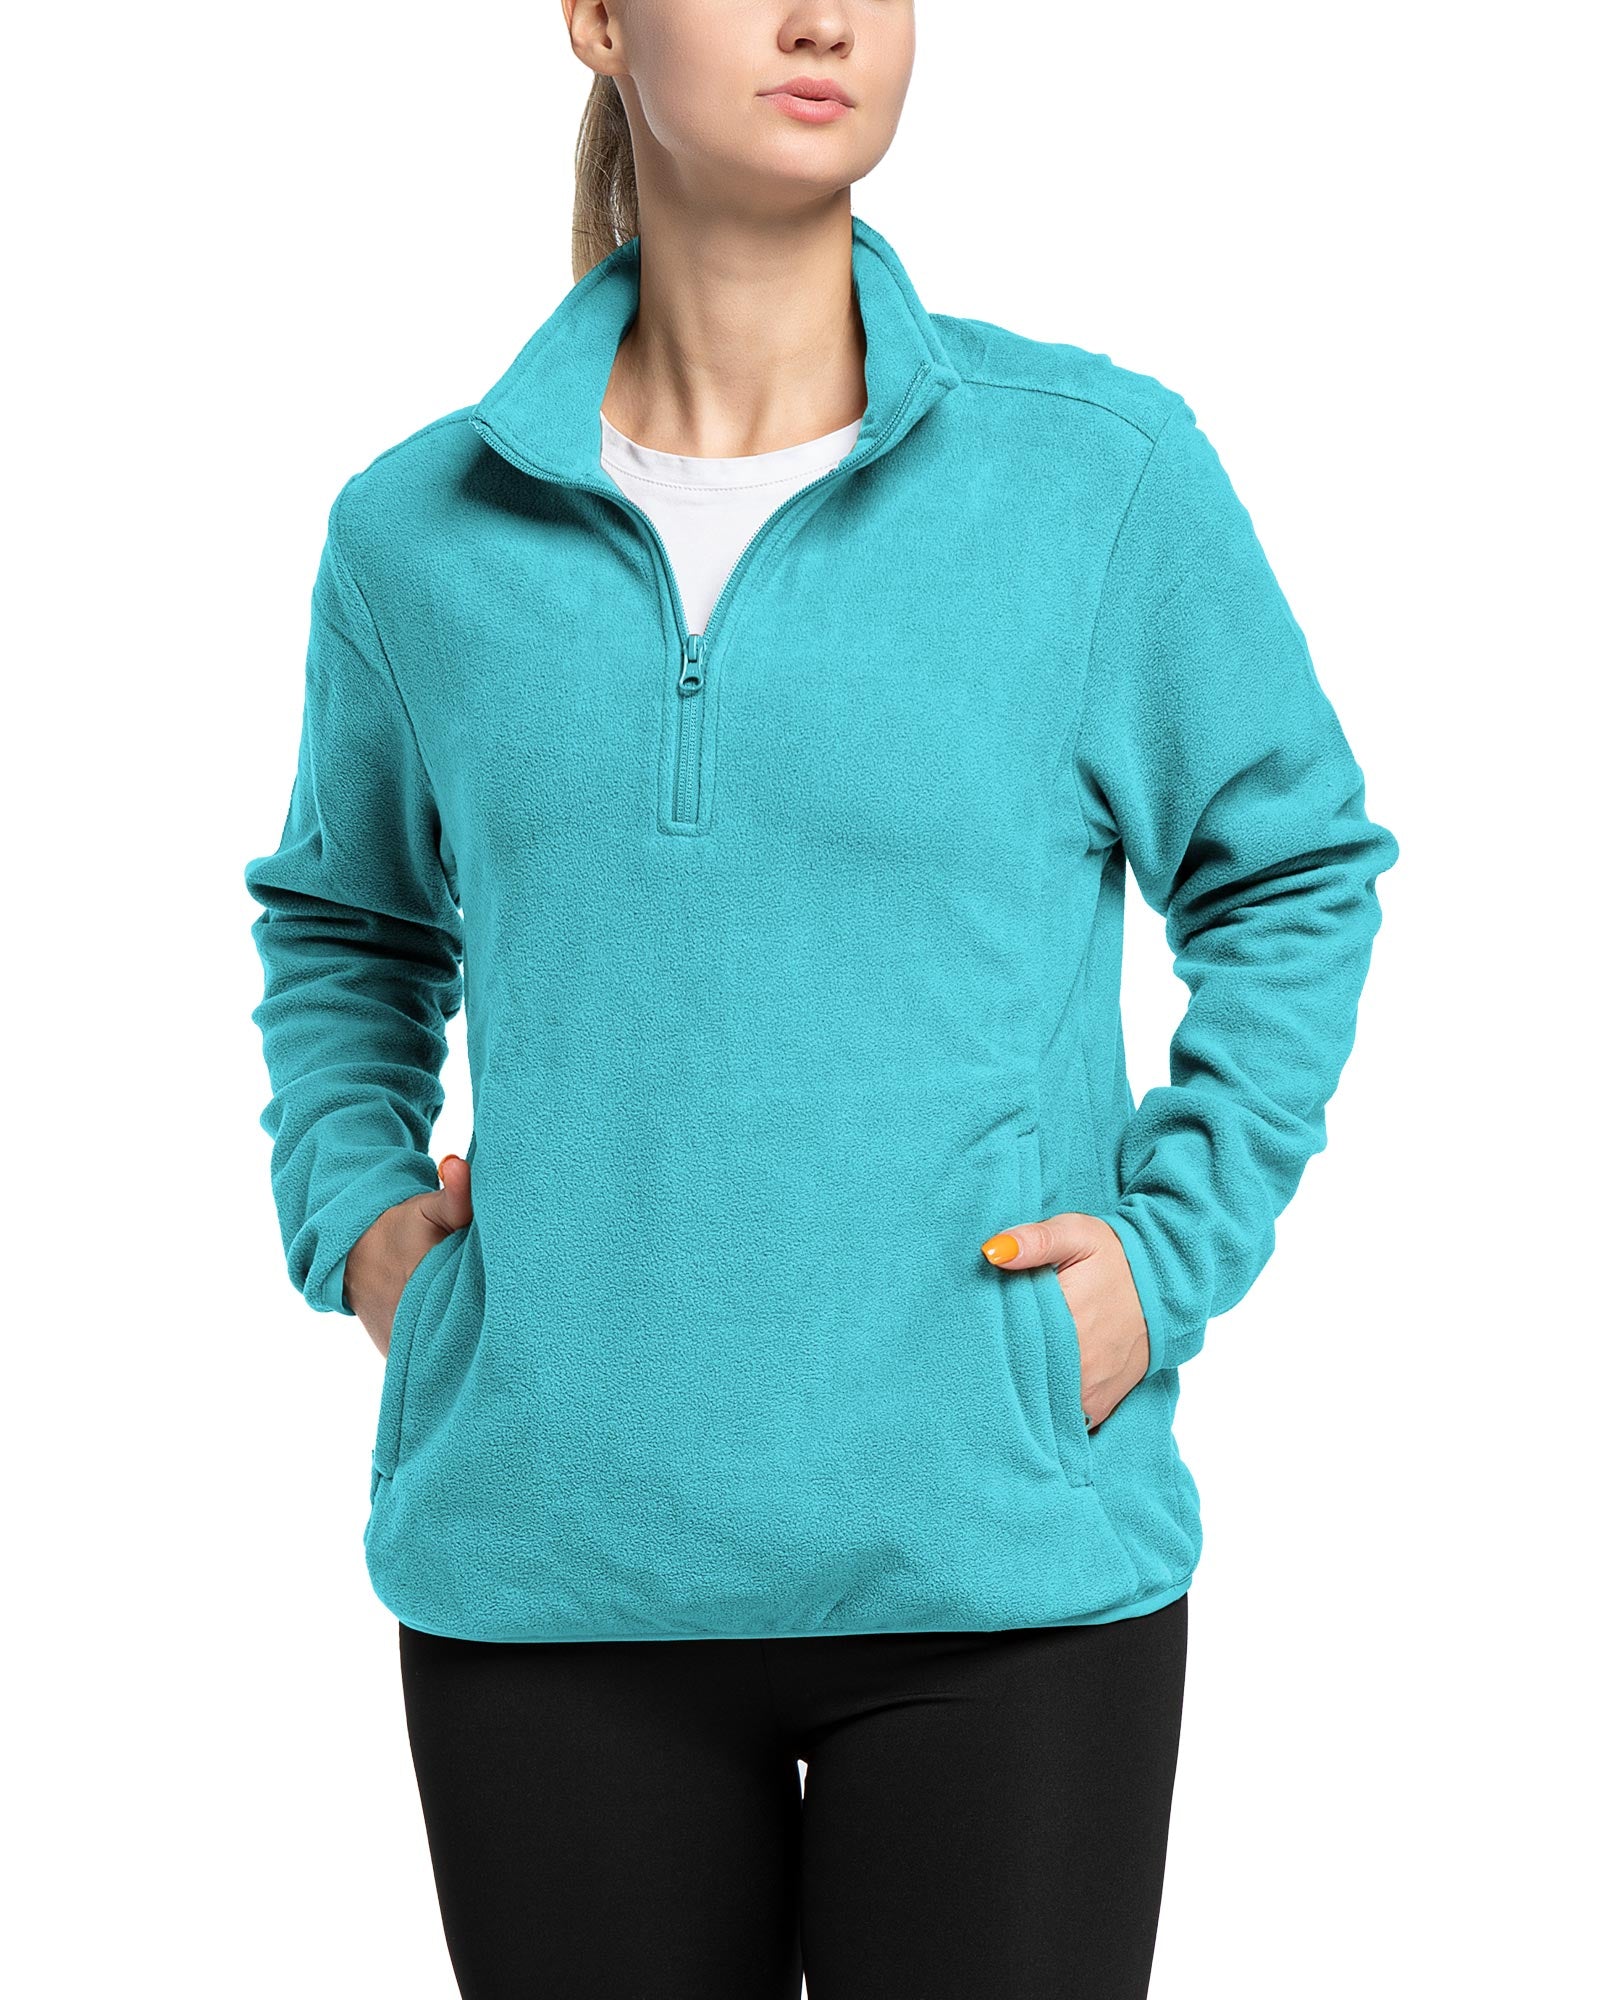 Tangerine Reflective Athletic Jackets for Women